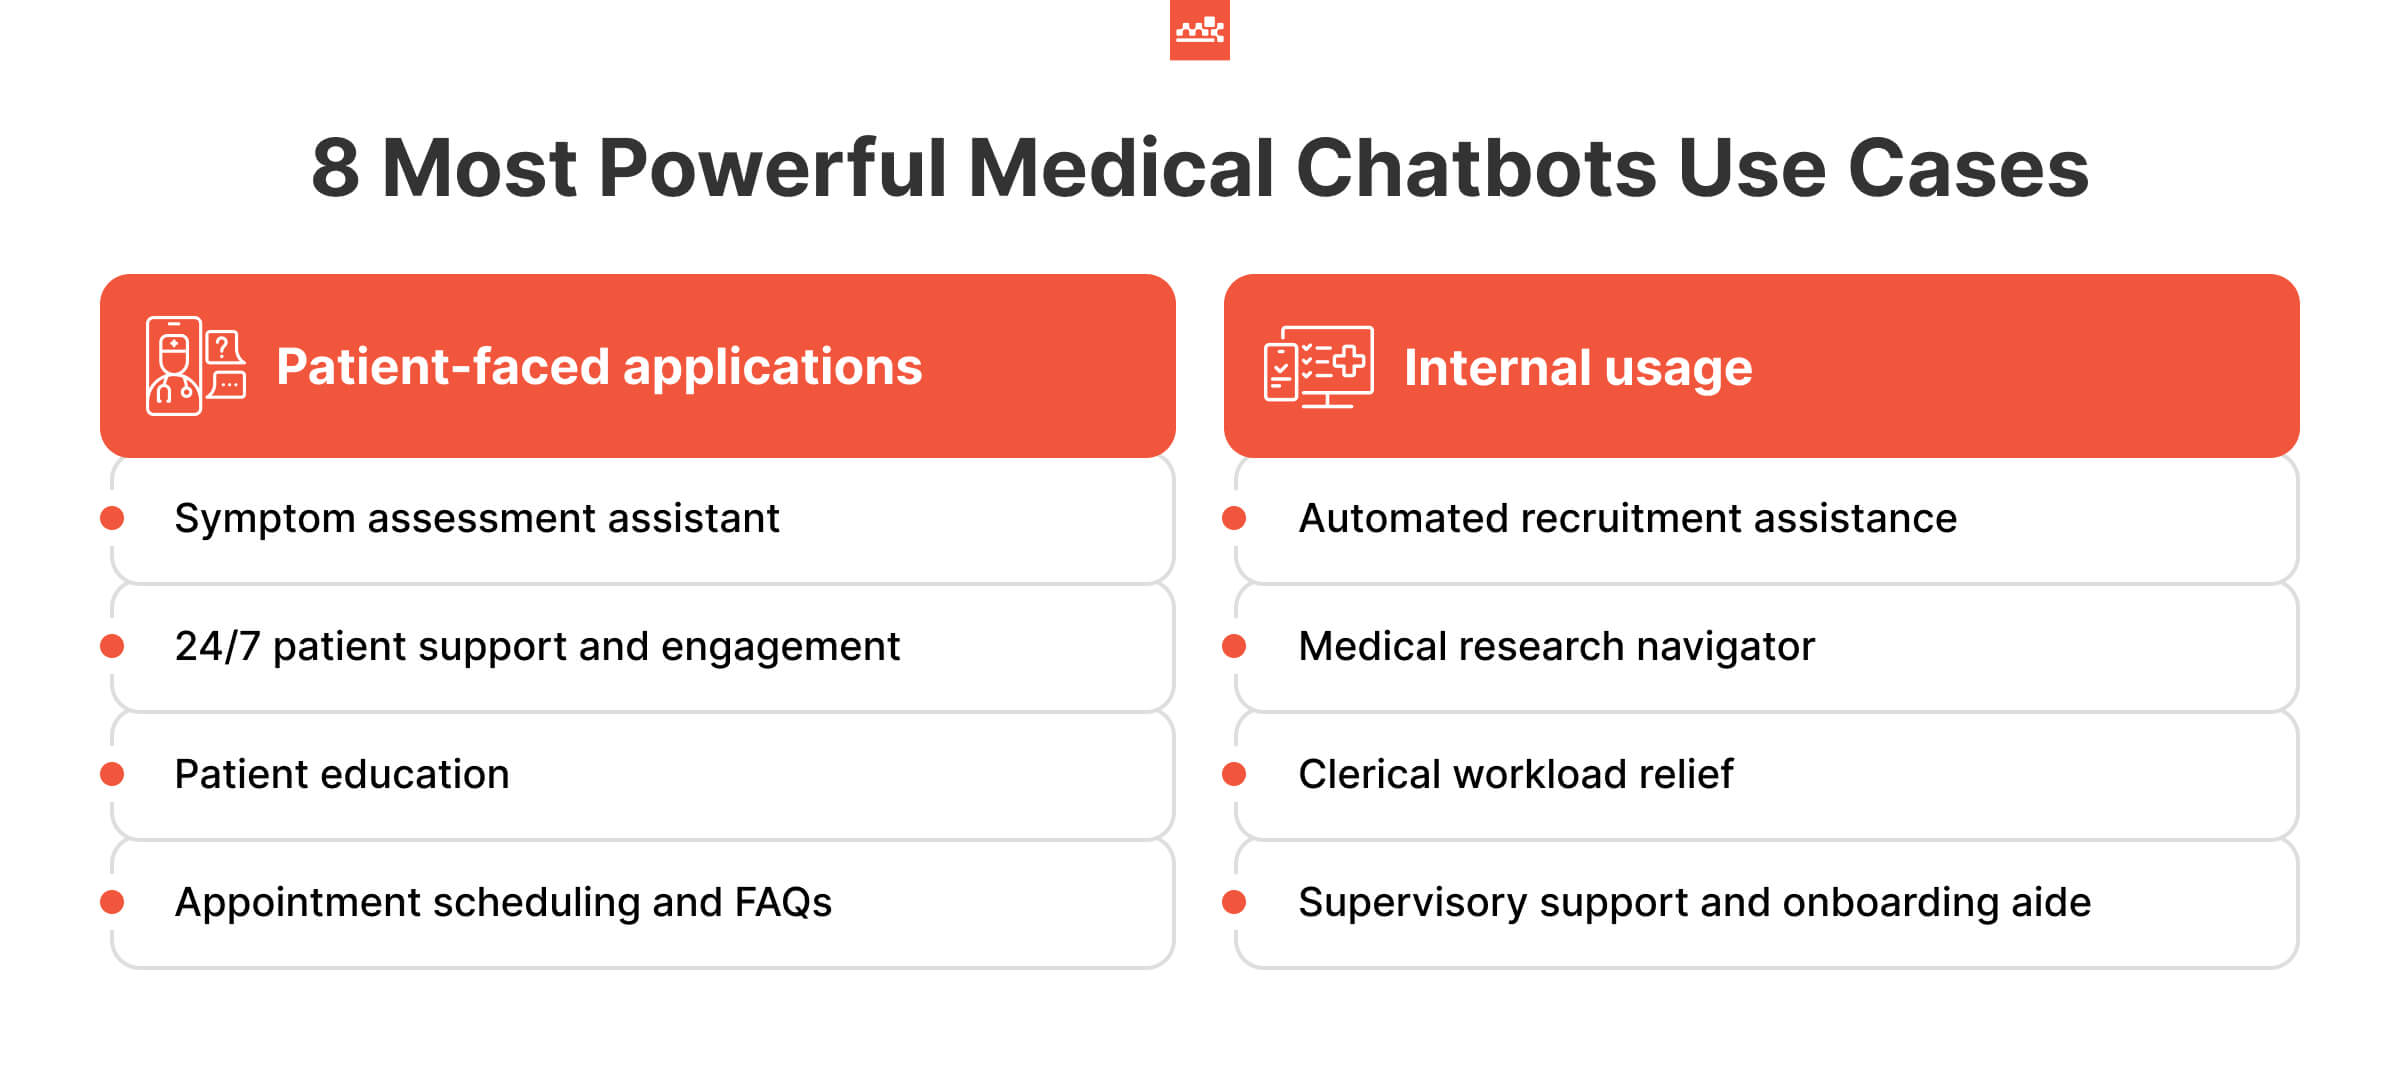 8 Powerful Medical Chatbots Use Cases